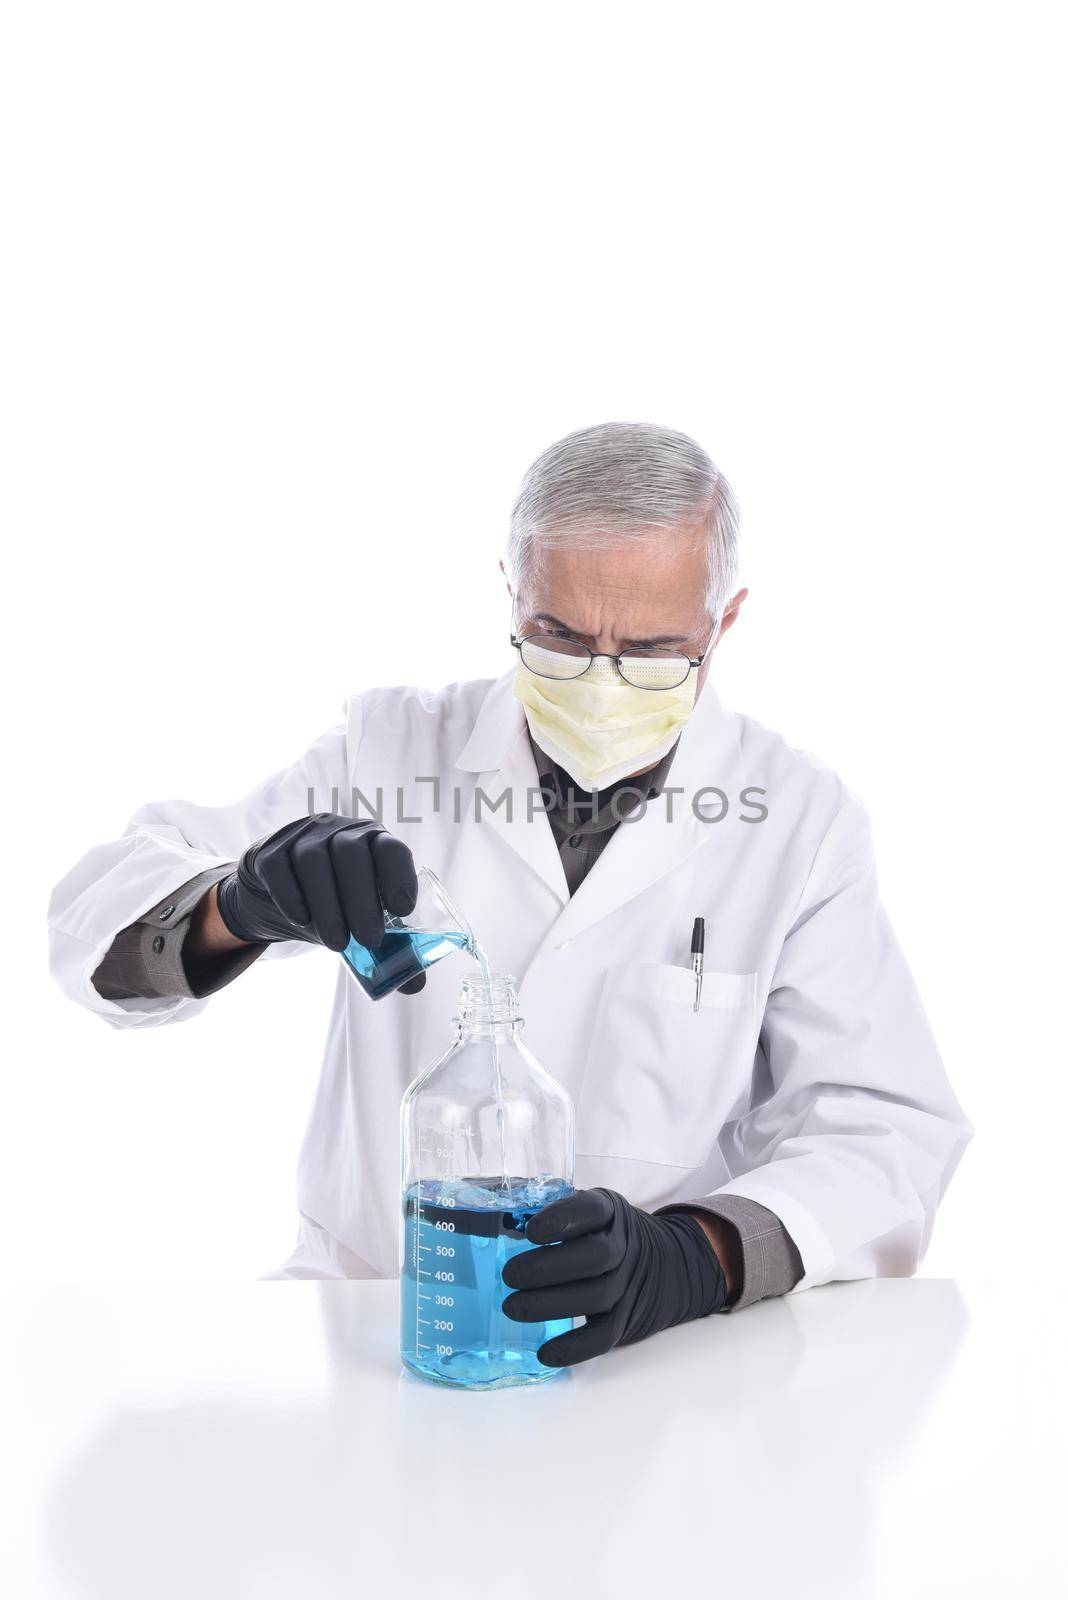 A lab tech pouring liquid from one vessel into another. Man is wearing a protective mask and gloves, isolated on white.